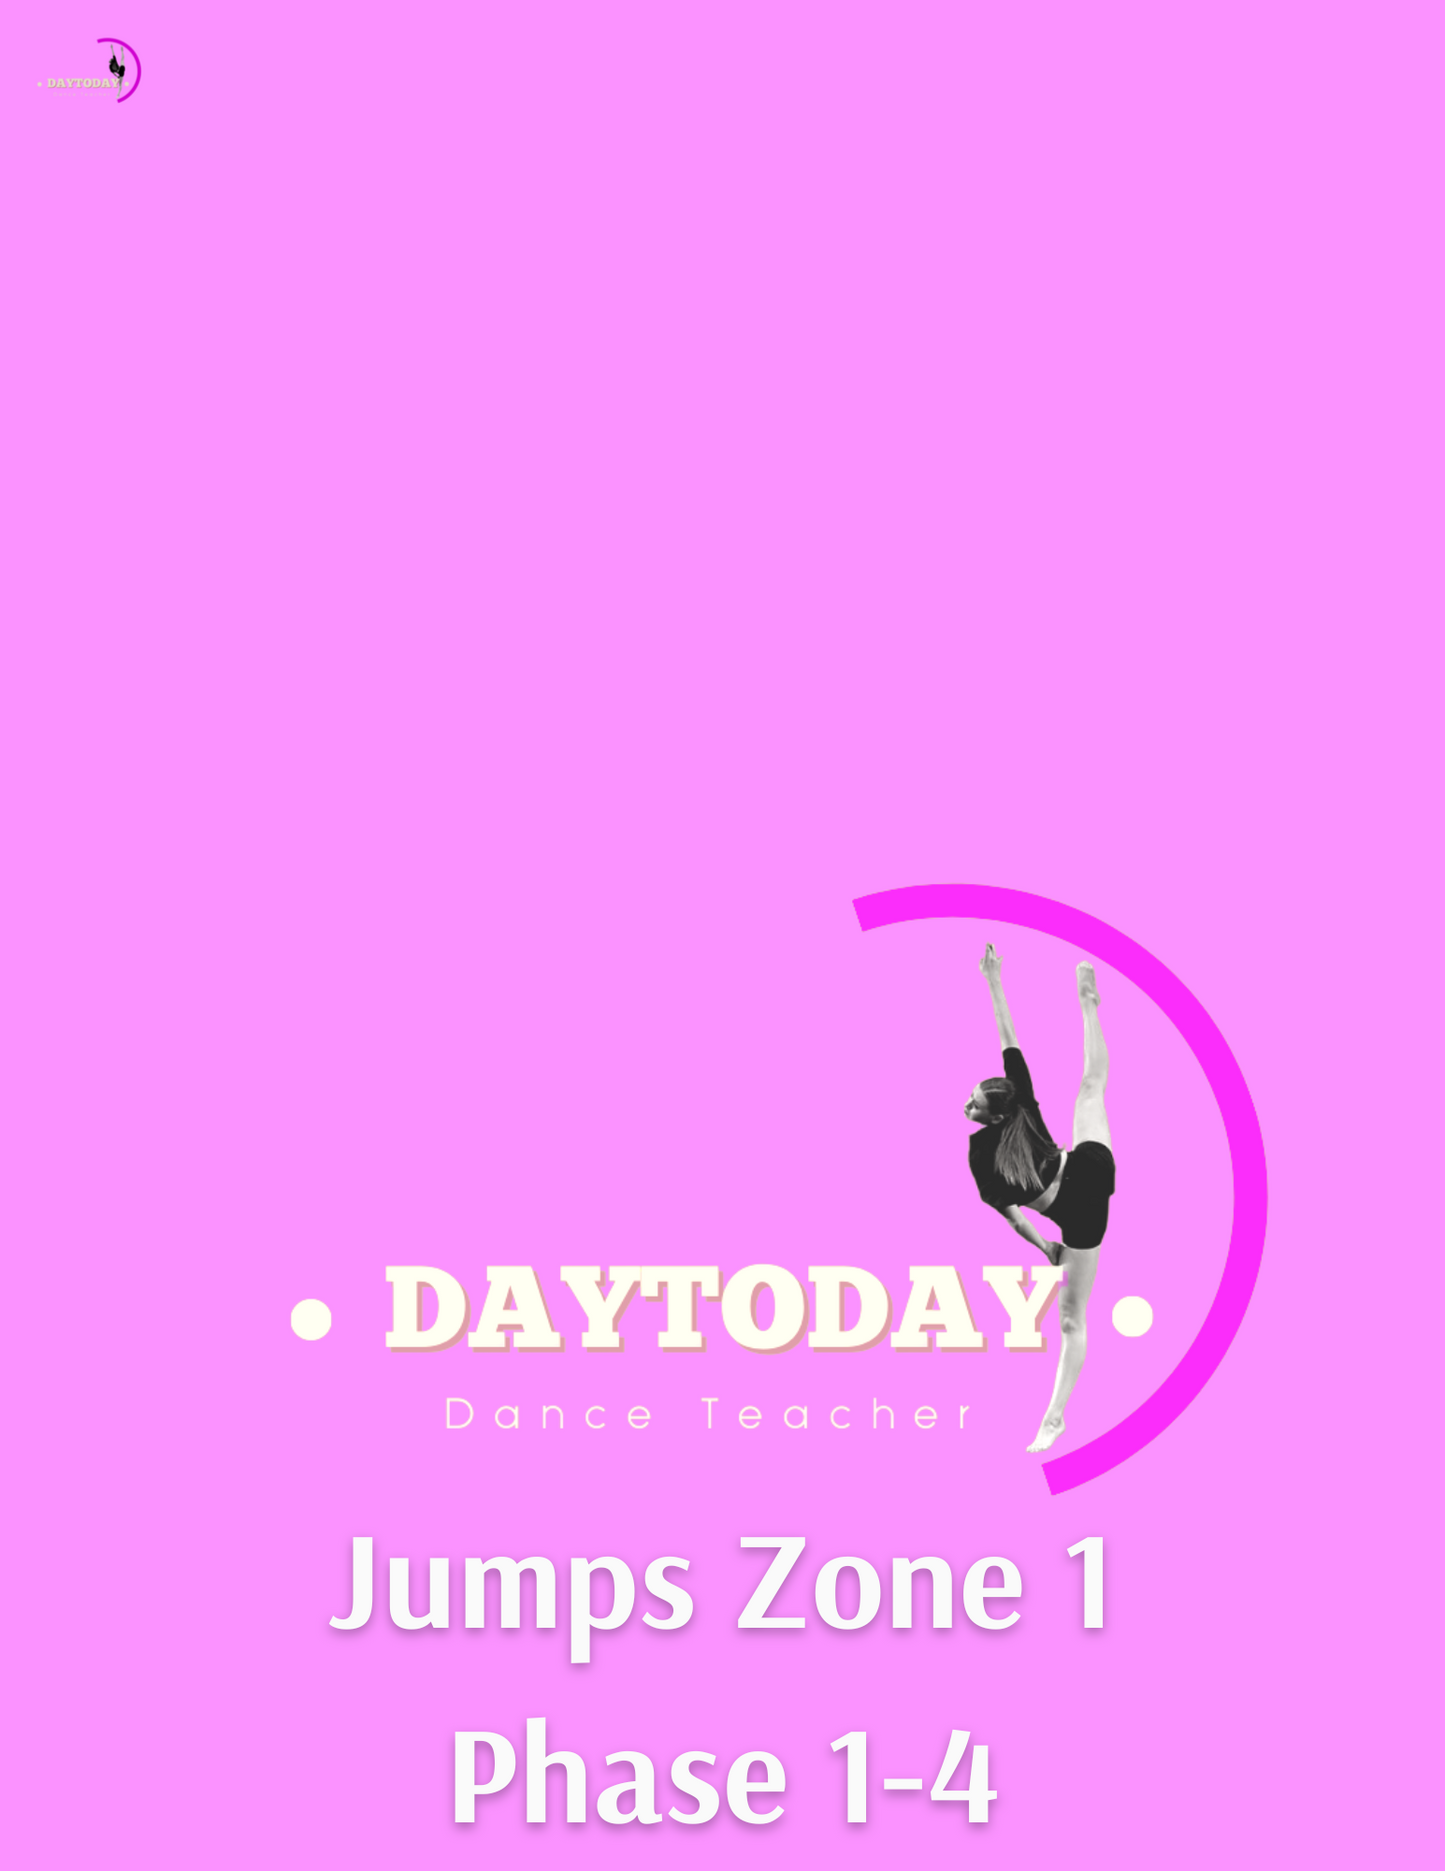 Jumps Zone 1 Phase 1-4